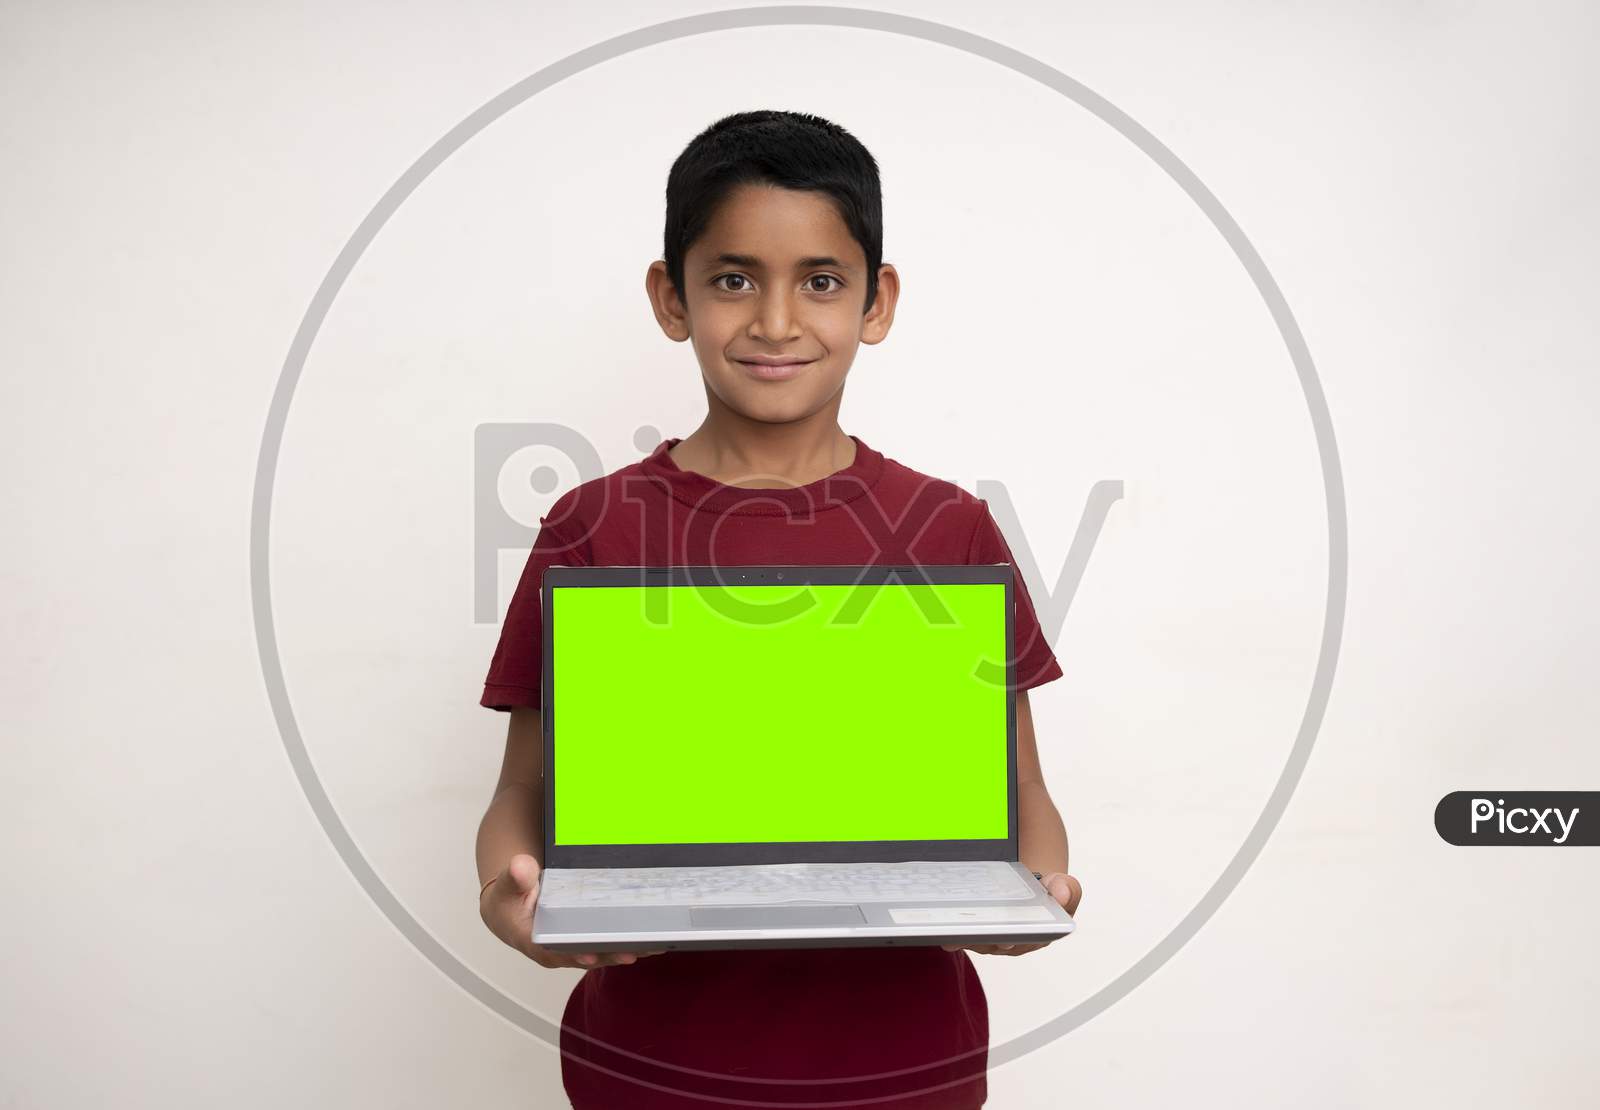 Young Indian Kid Holding A Laptop With Green Screen And Standing On A White Isolated Background With Copy Space.